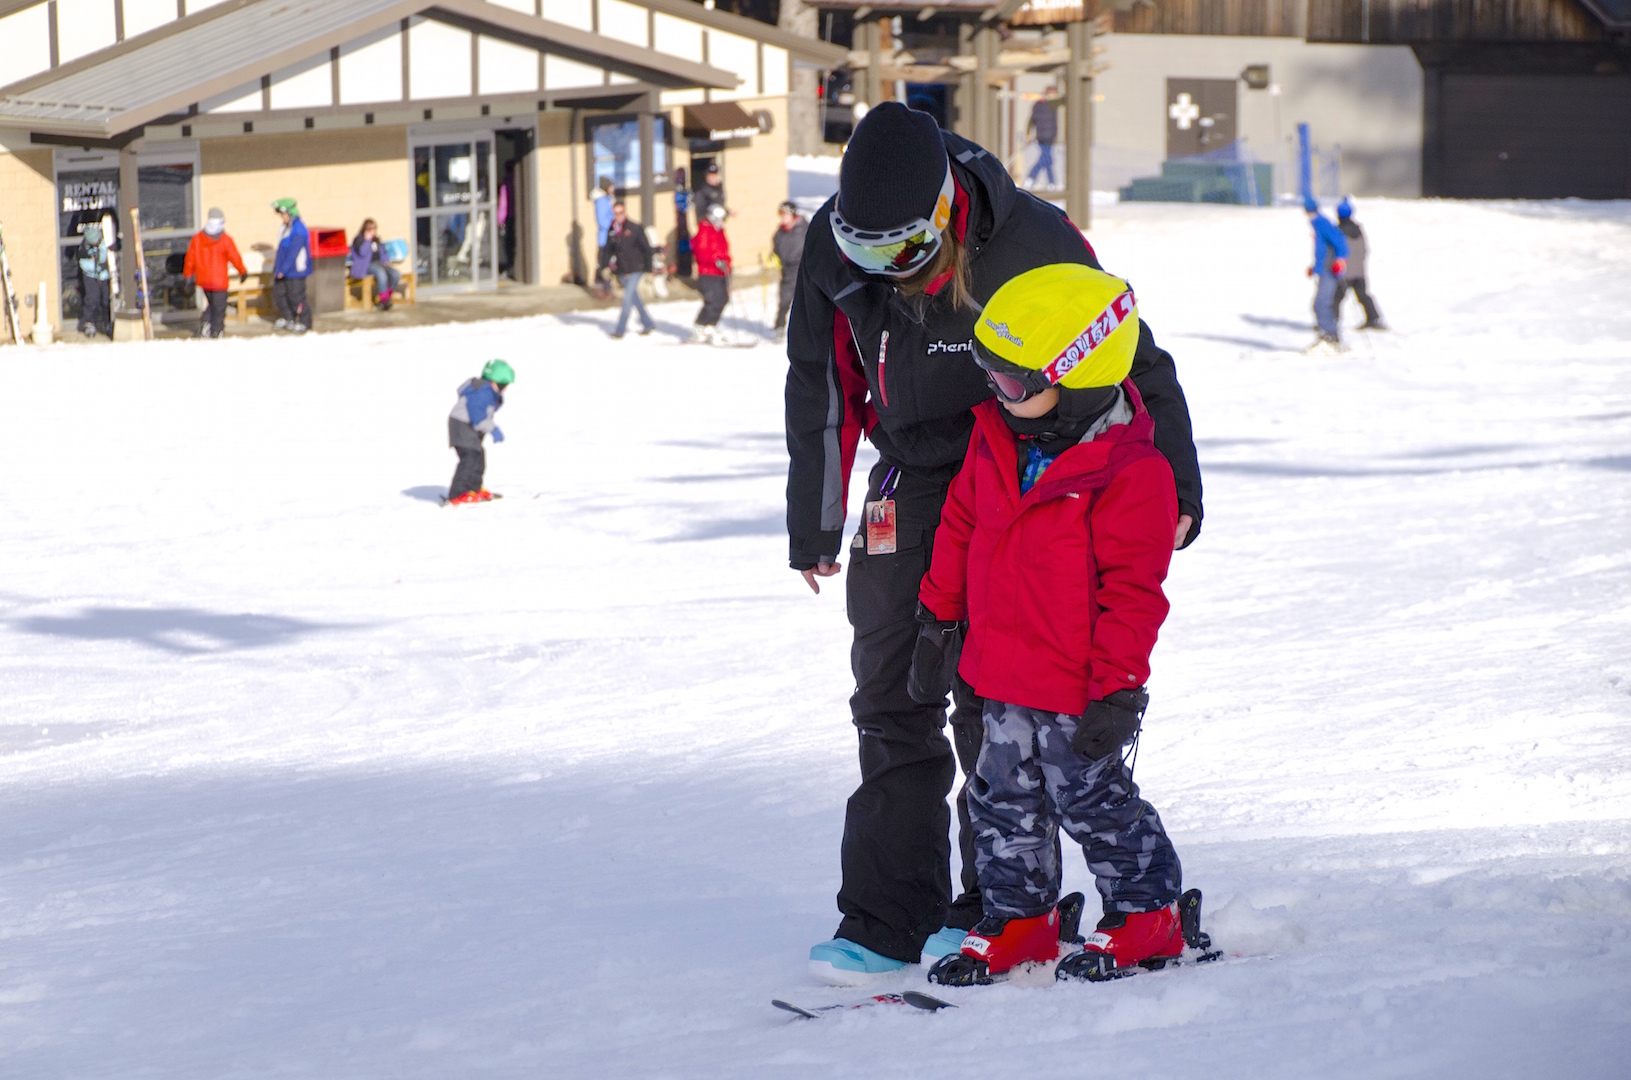 Children's Programs at Snow Trails this Holiday Weekend